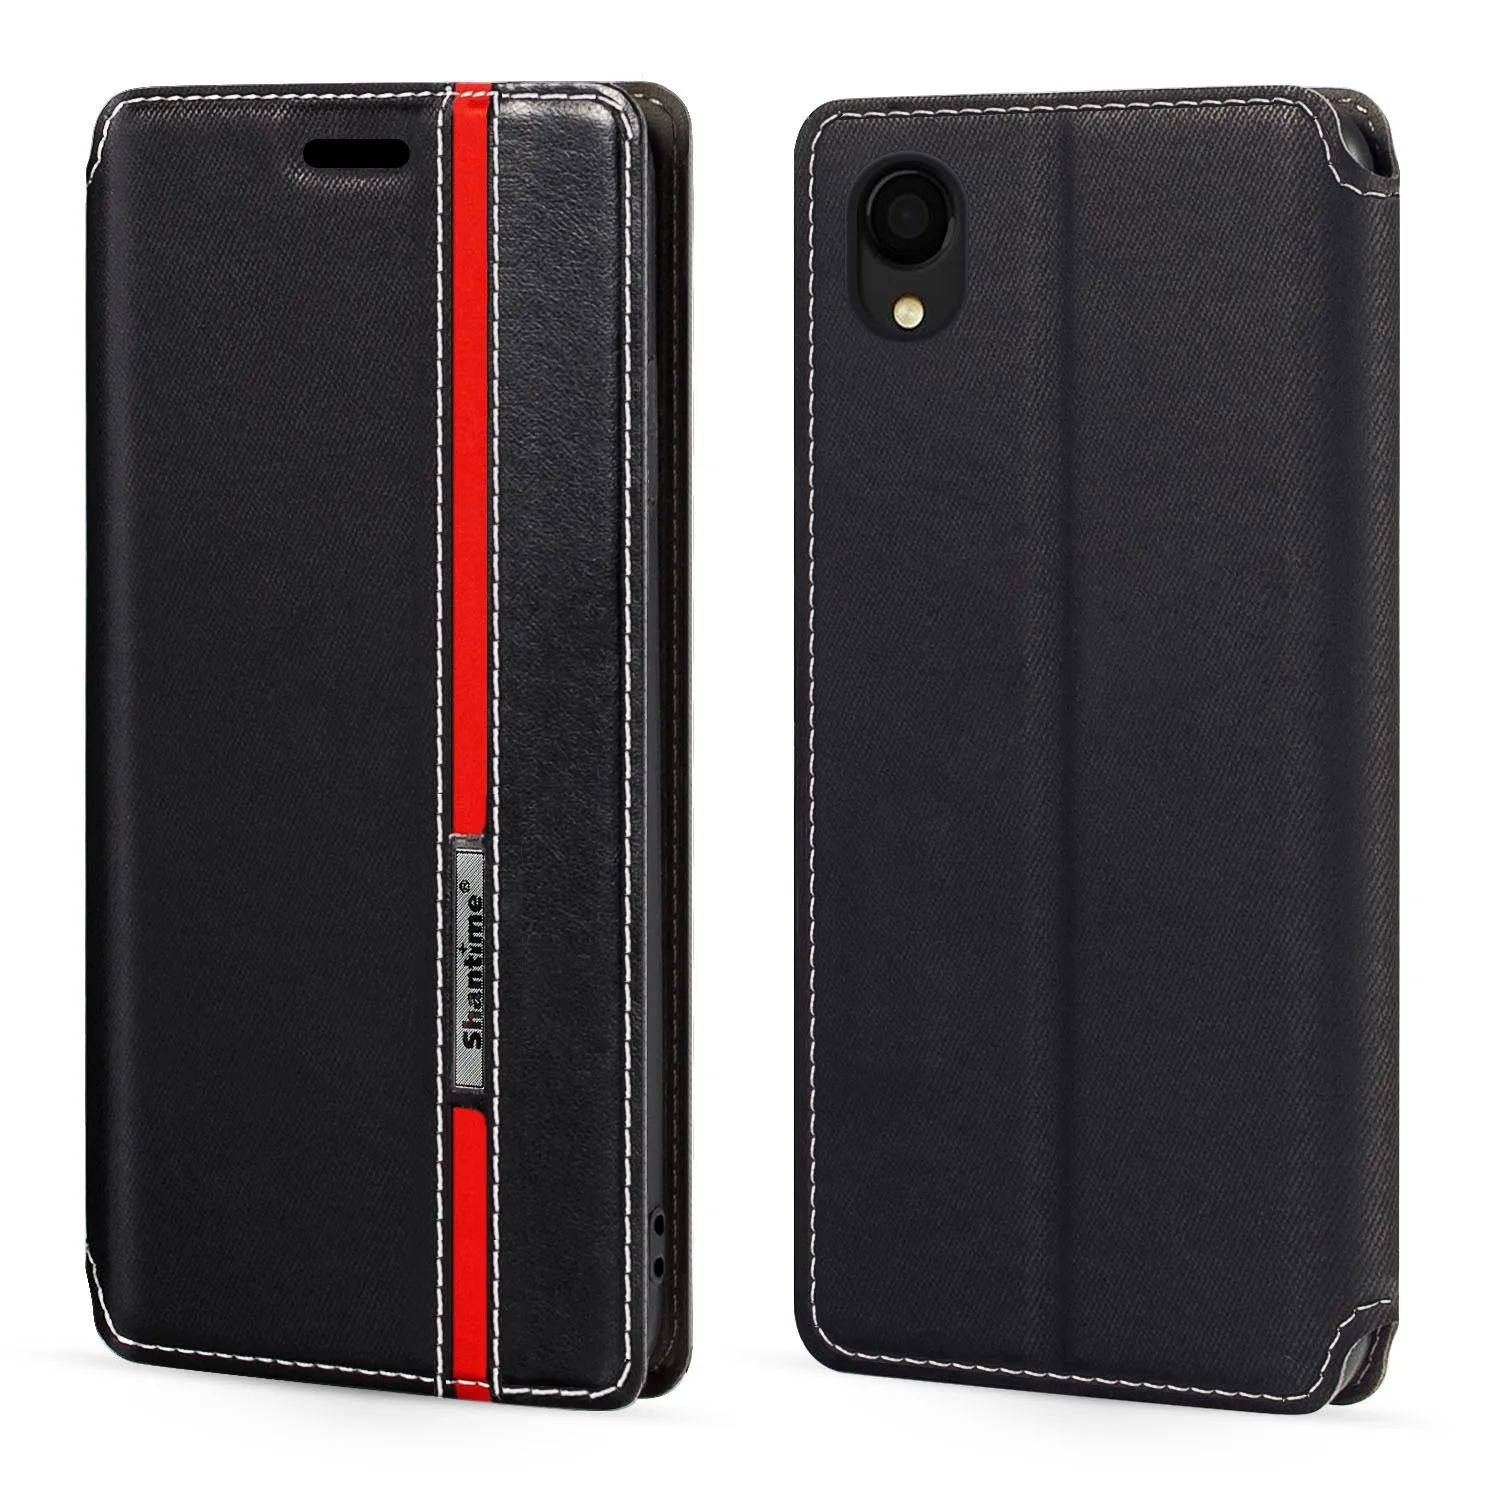 For Samsung Galaxy A22 5G Japanese version Galaxy A22 5G SC-56B Case  Fashion Multicolor Magnetic Closure Leather Flip Case Cover